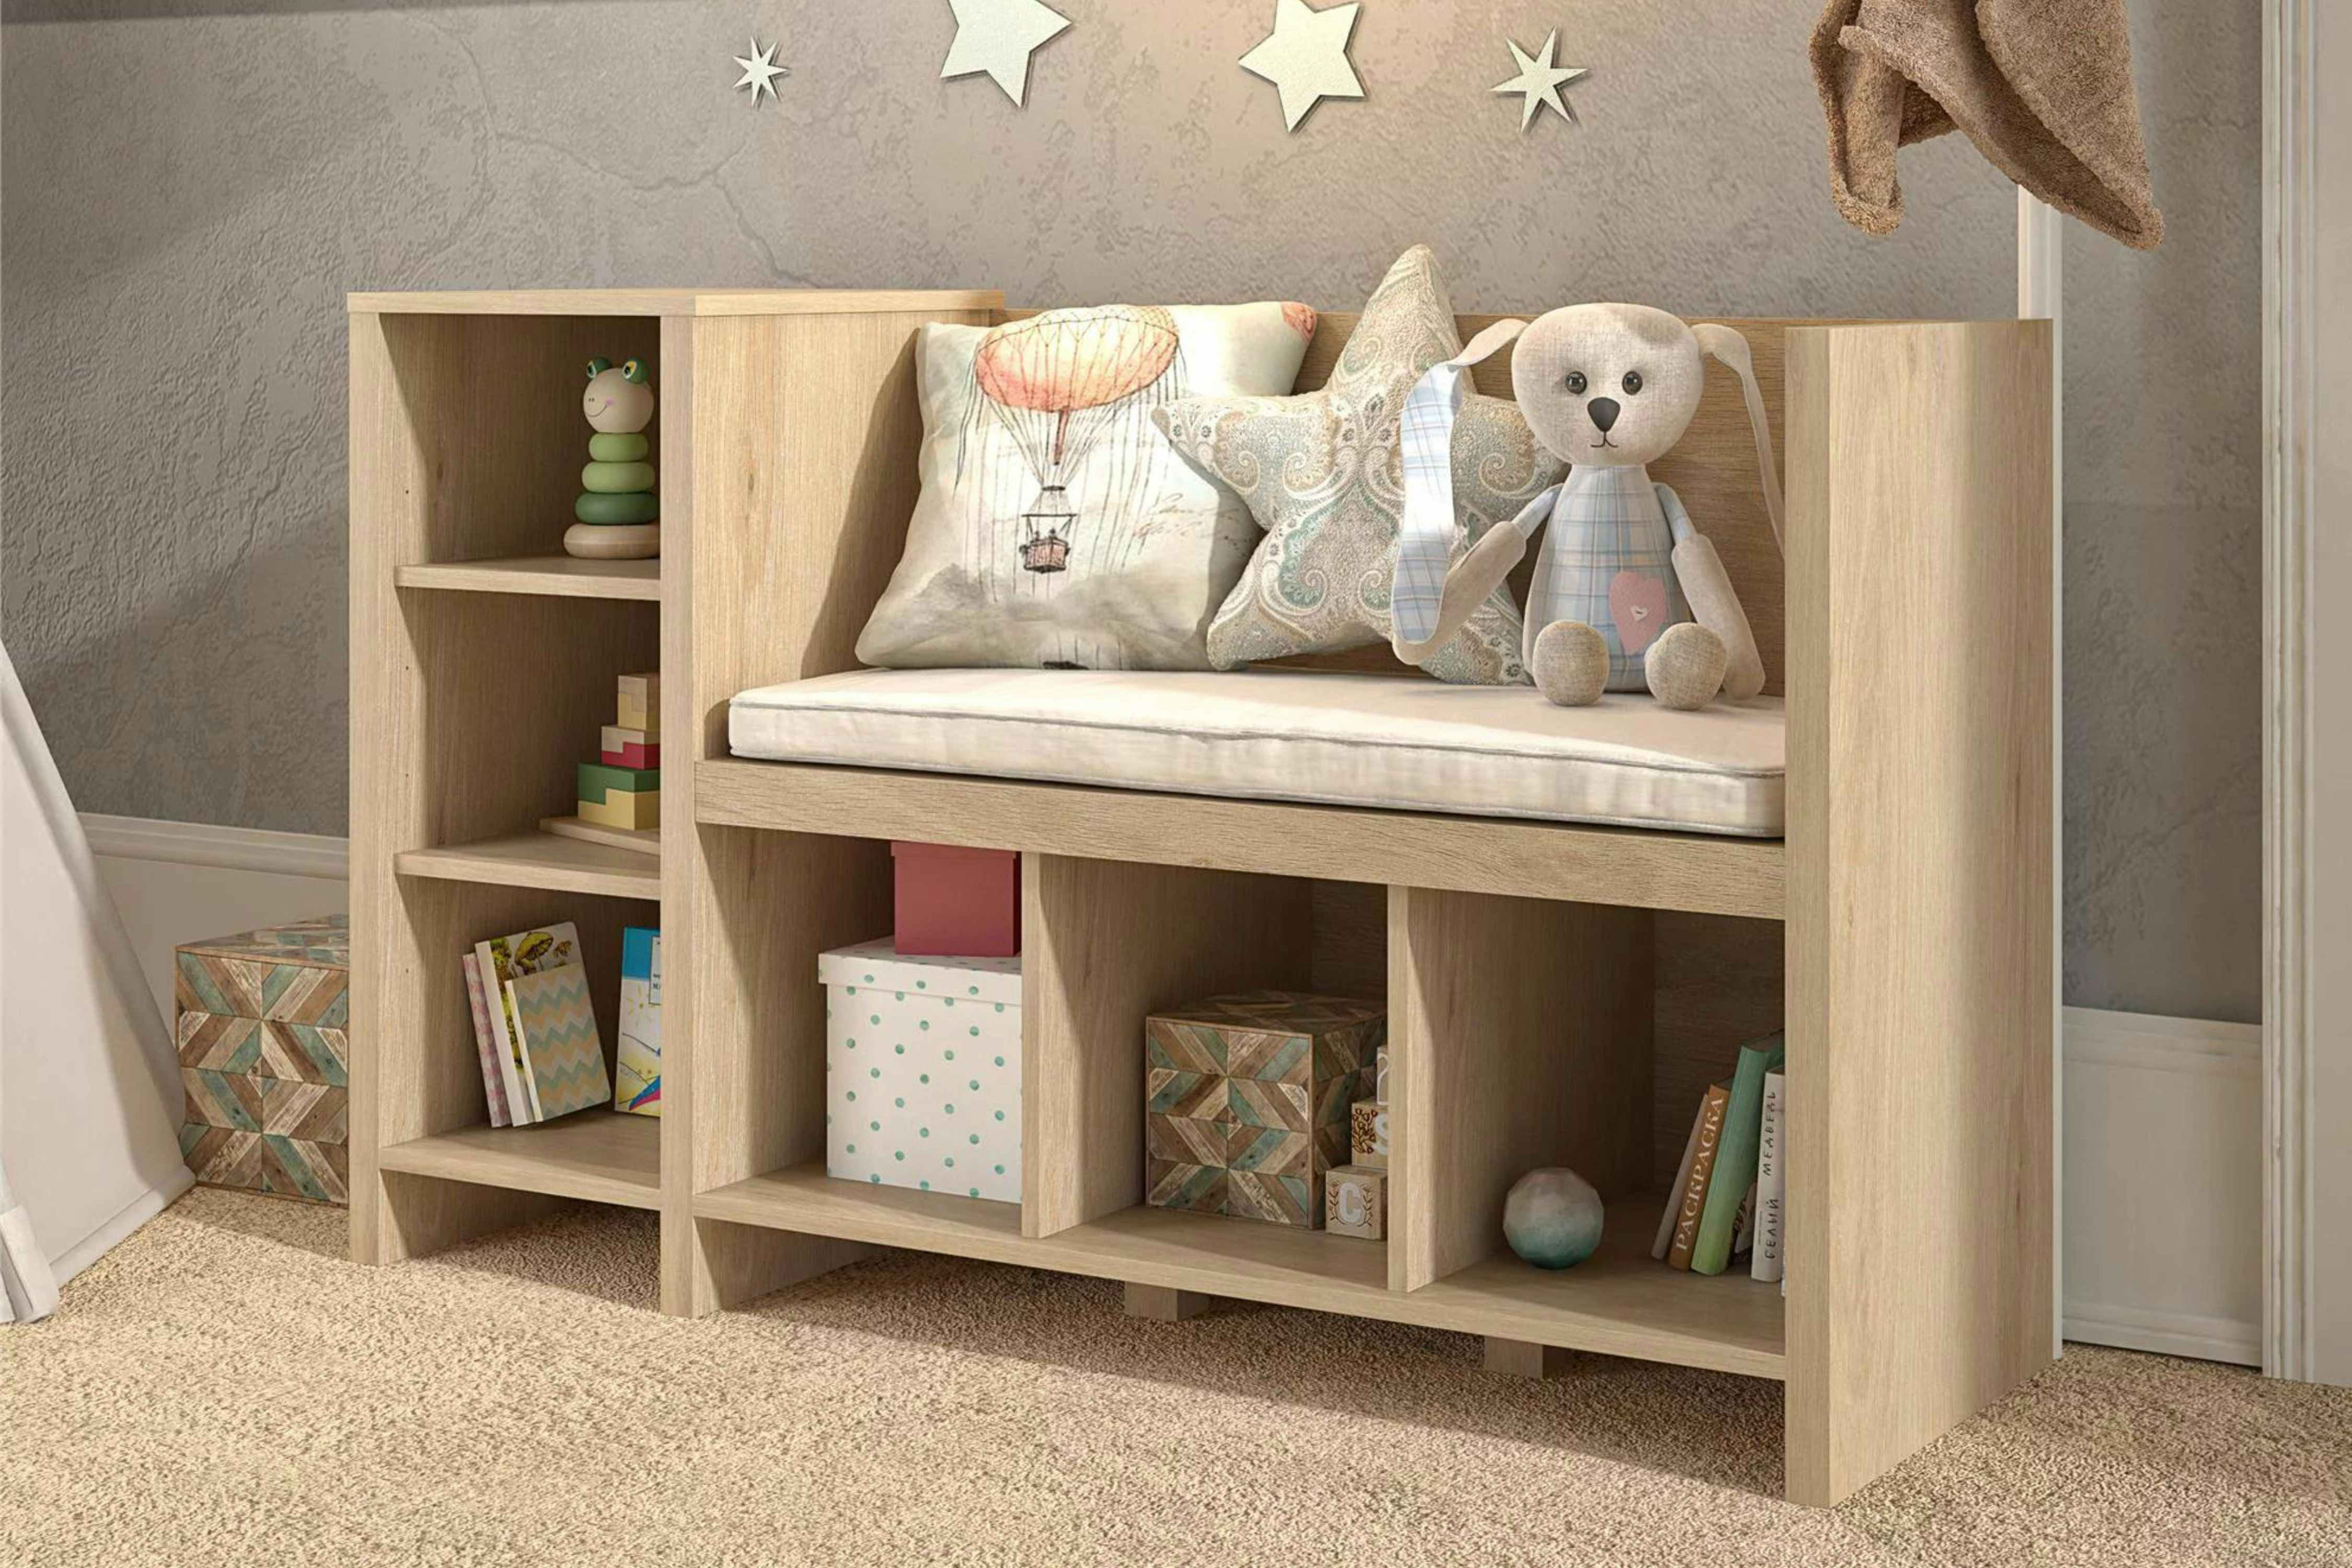 Save 48% on a Kids' Storage Bench With Coat Rack — Just $98 at Walmart